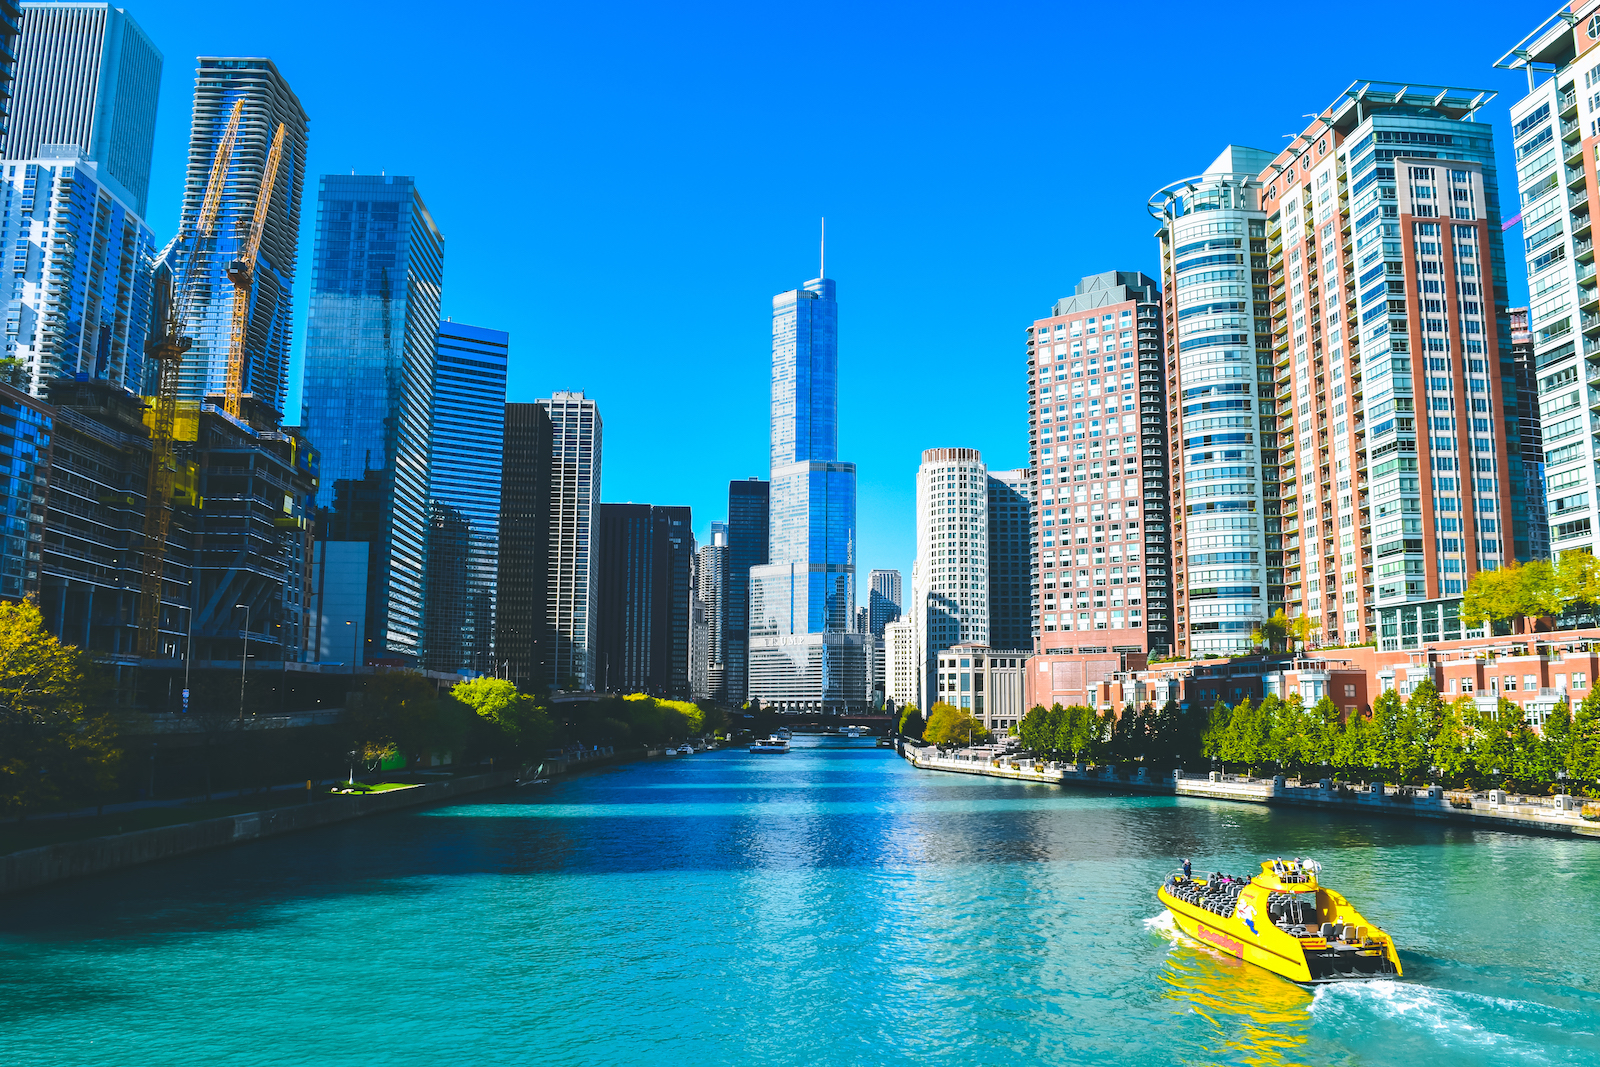 A First Timers Weekend City Guide to Chicago Riverwalk Chicago River Travel guide to chicago illinois blog what to do what to see where to go 3 days-11